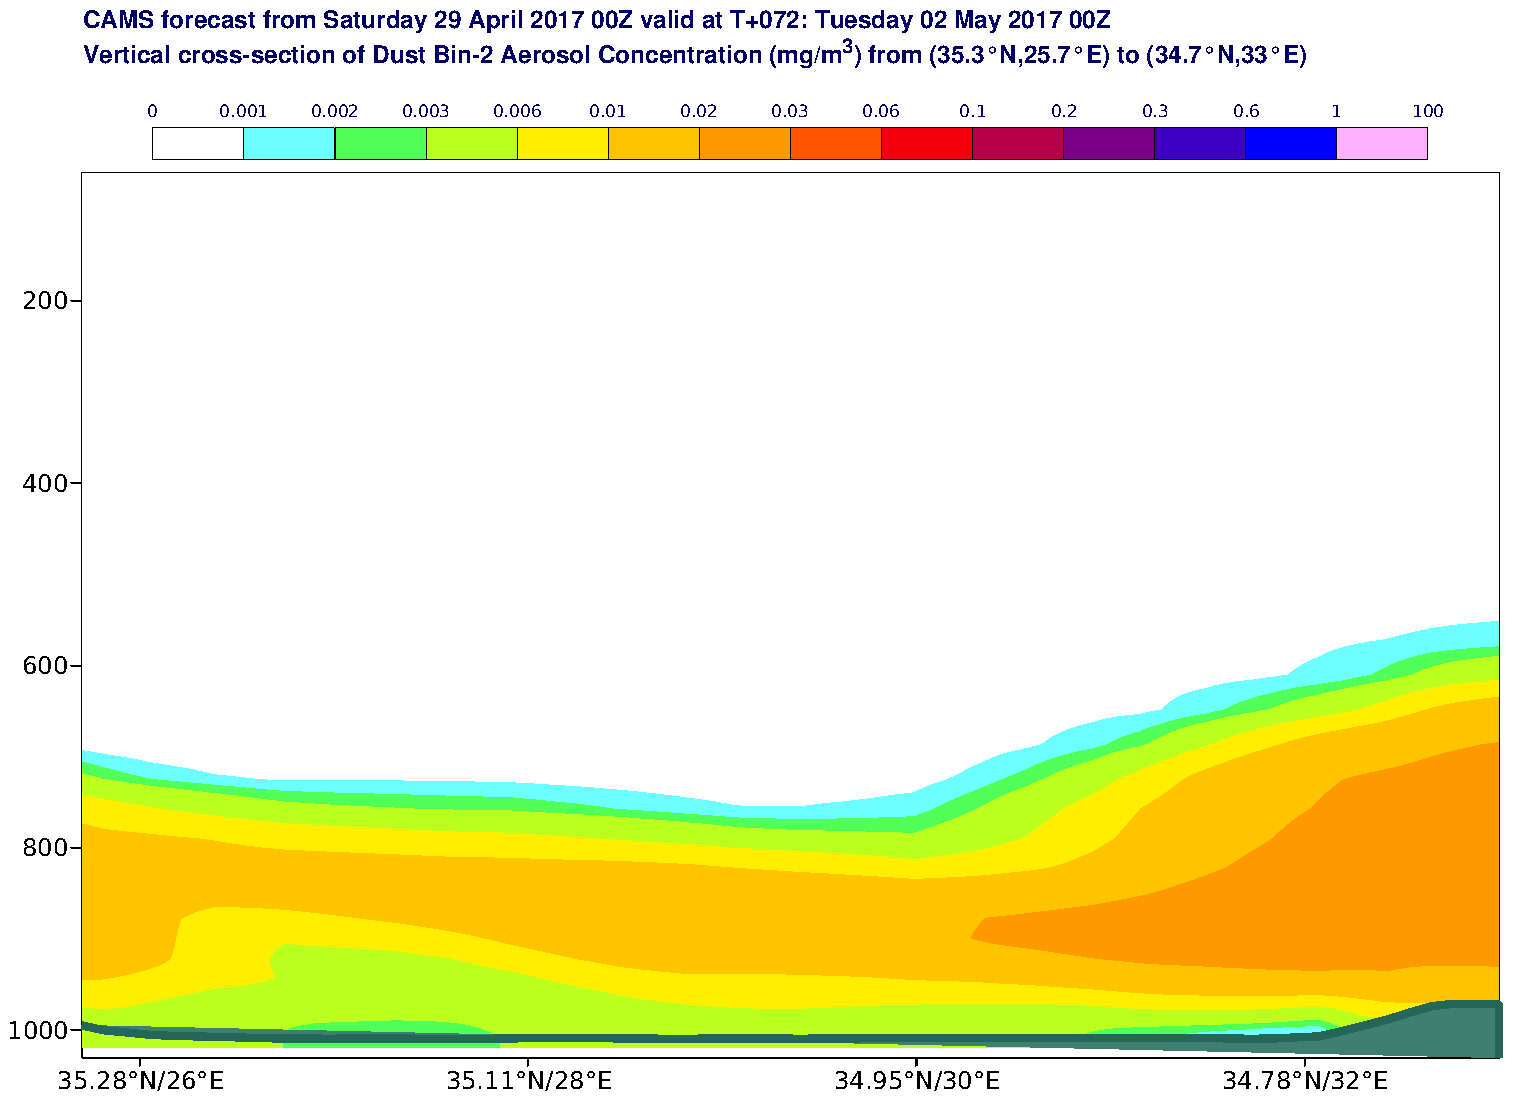 Vertical cross-section of Dust Bin-2 Aerosol Concentration (mg/m3) valid at T72 - 2017-05-02 00:00